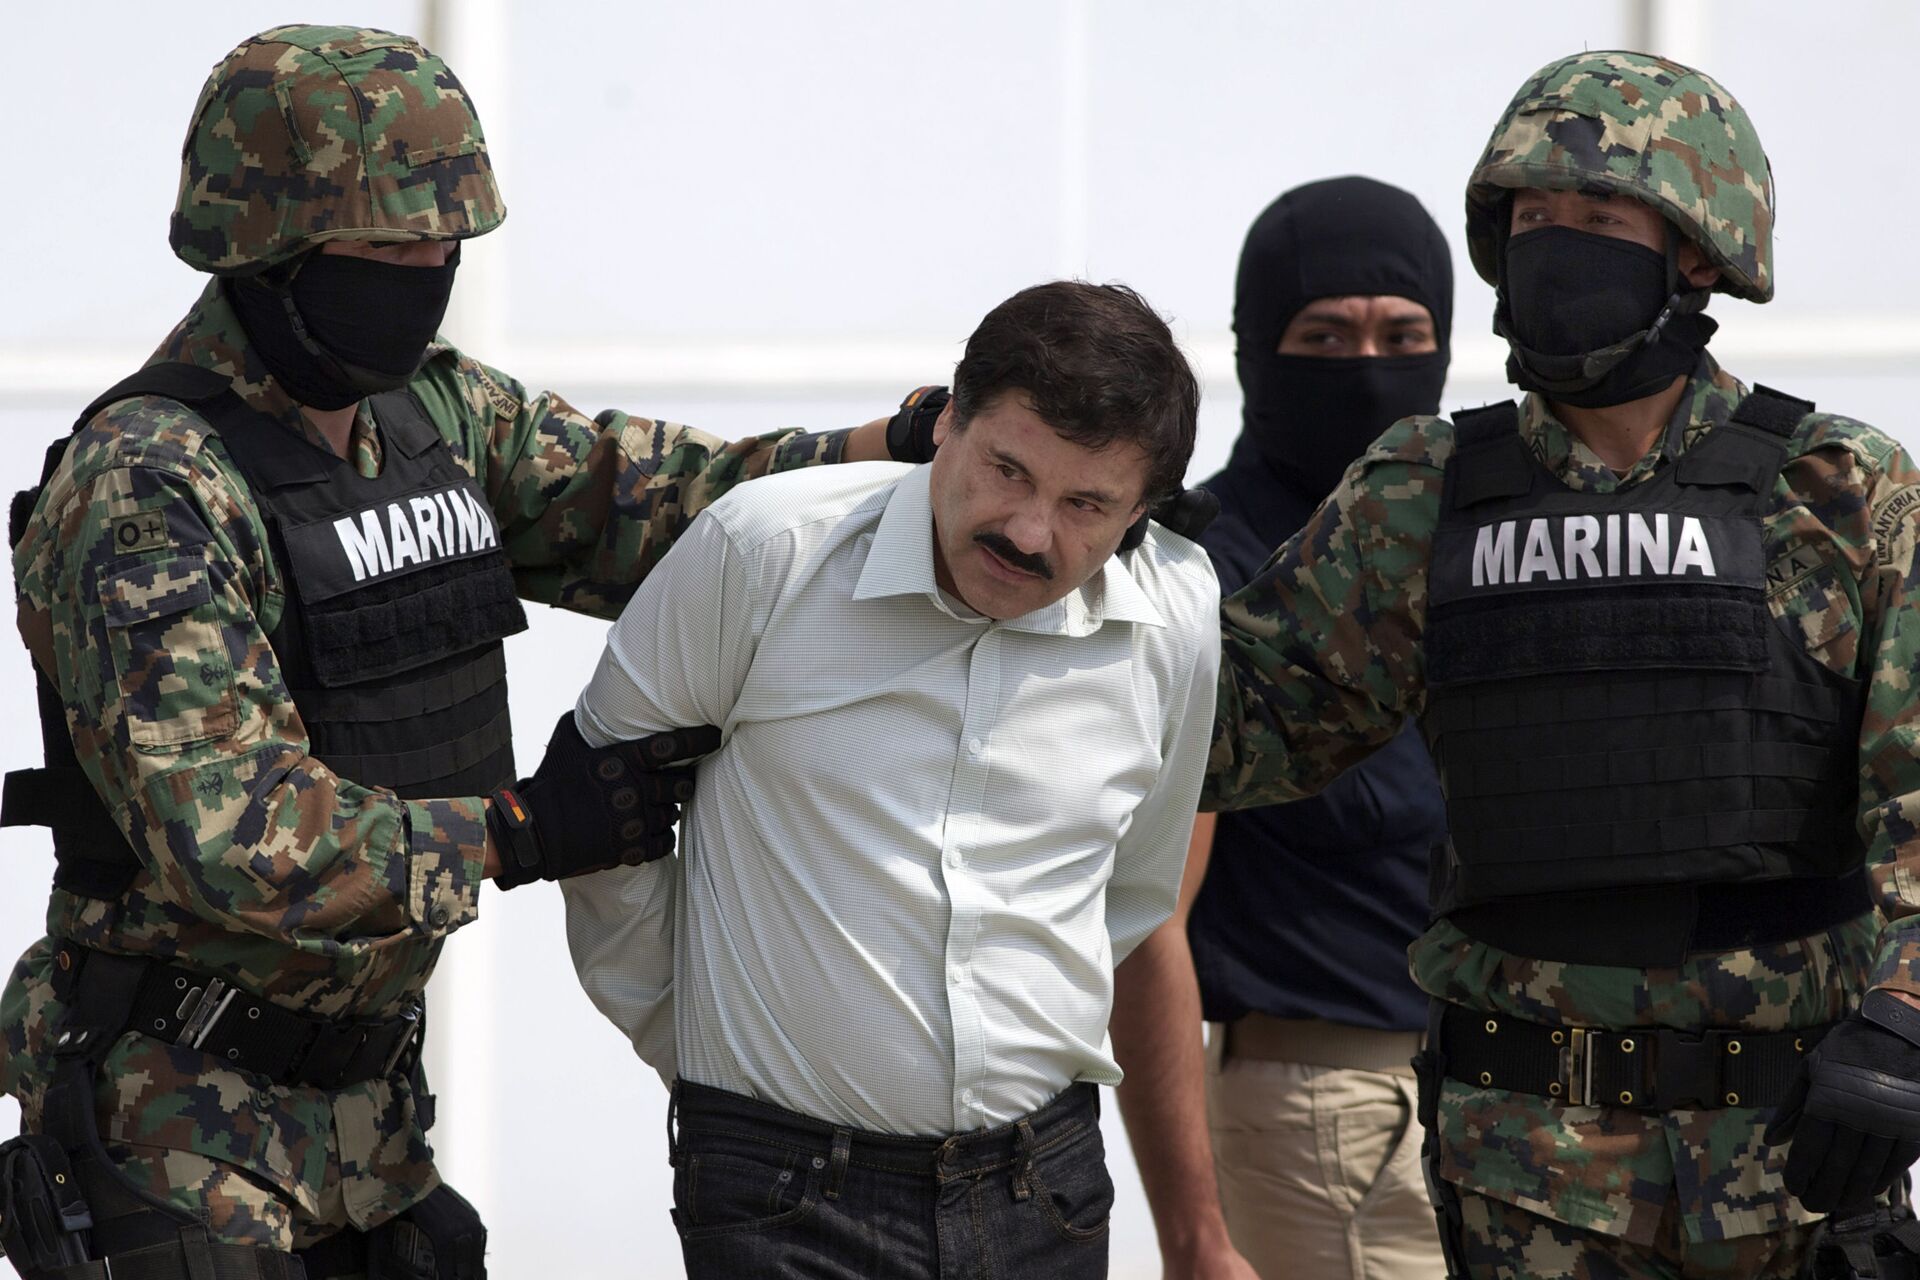 El Chapo's Wife to Plead Guilty to Helping Him Run Drug Cartel, Escape From Mexican Prison - Report - Sputnik International, 1920, 09.06.2021